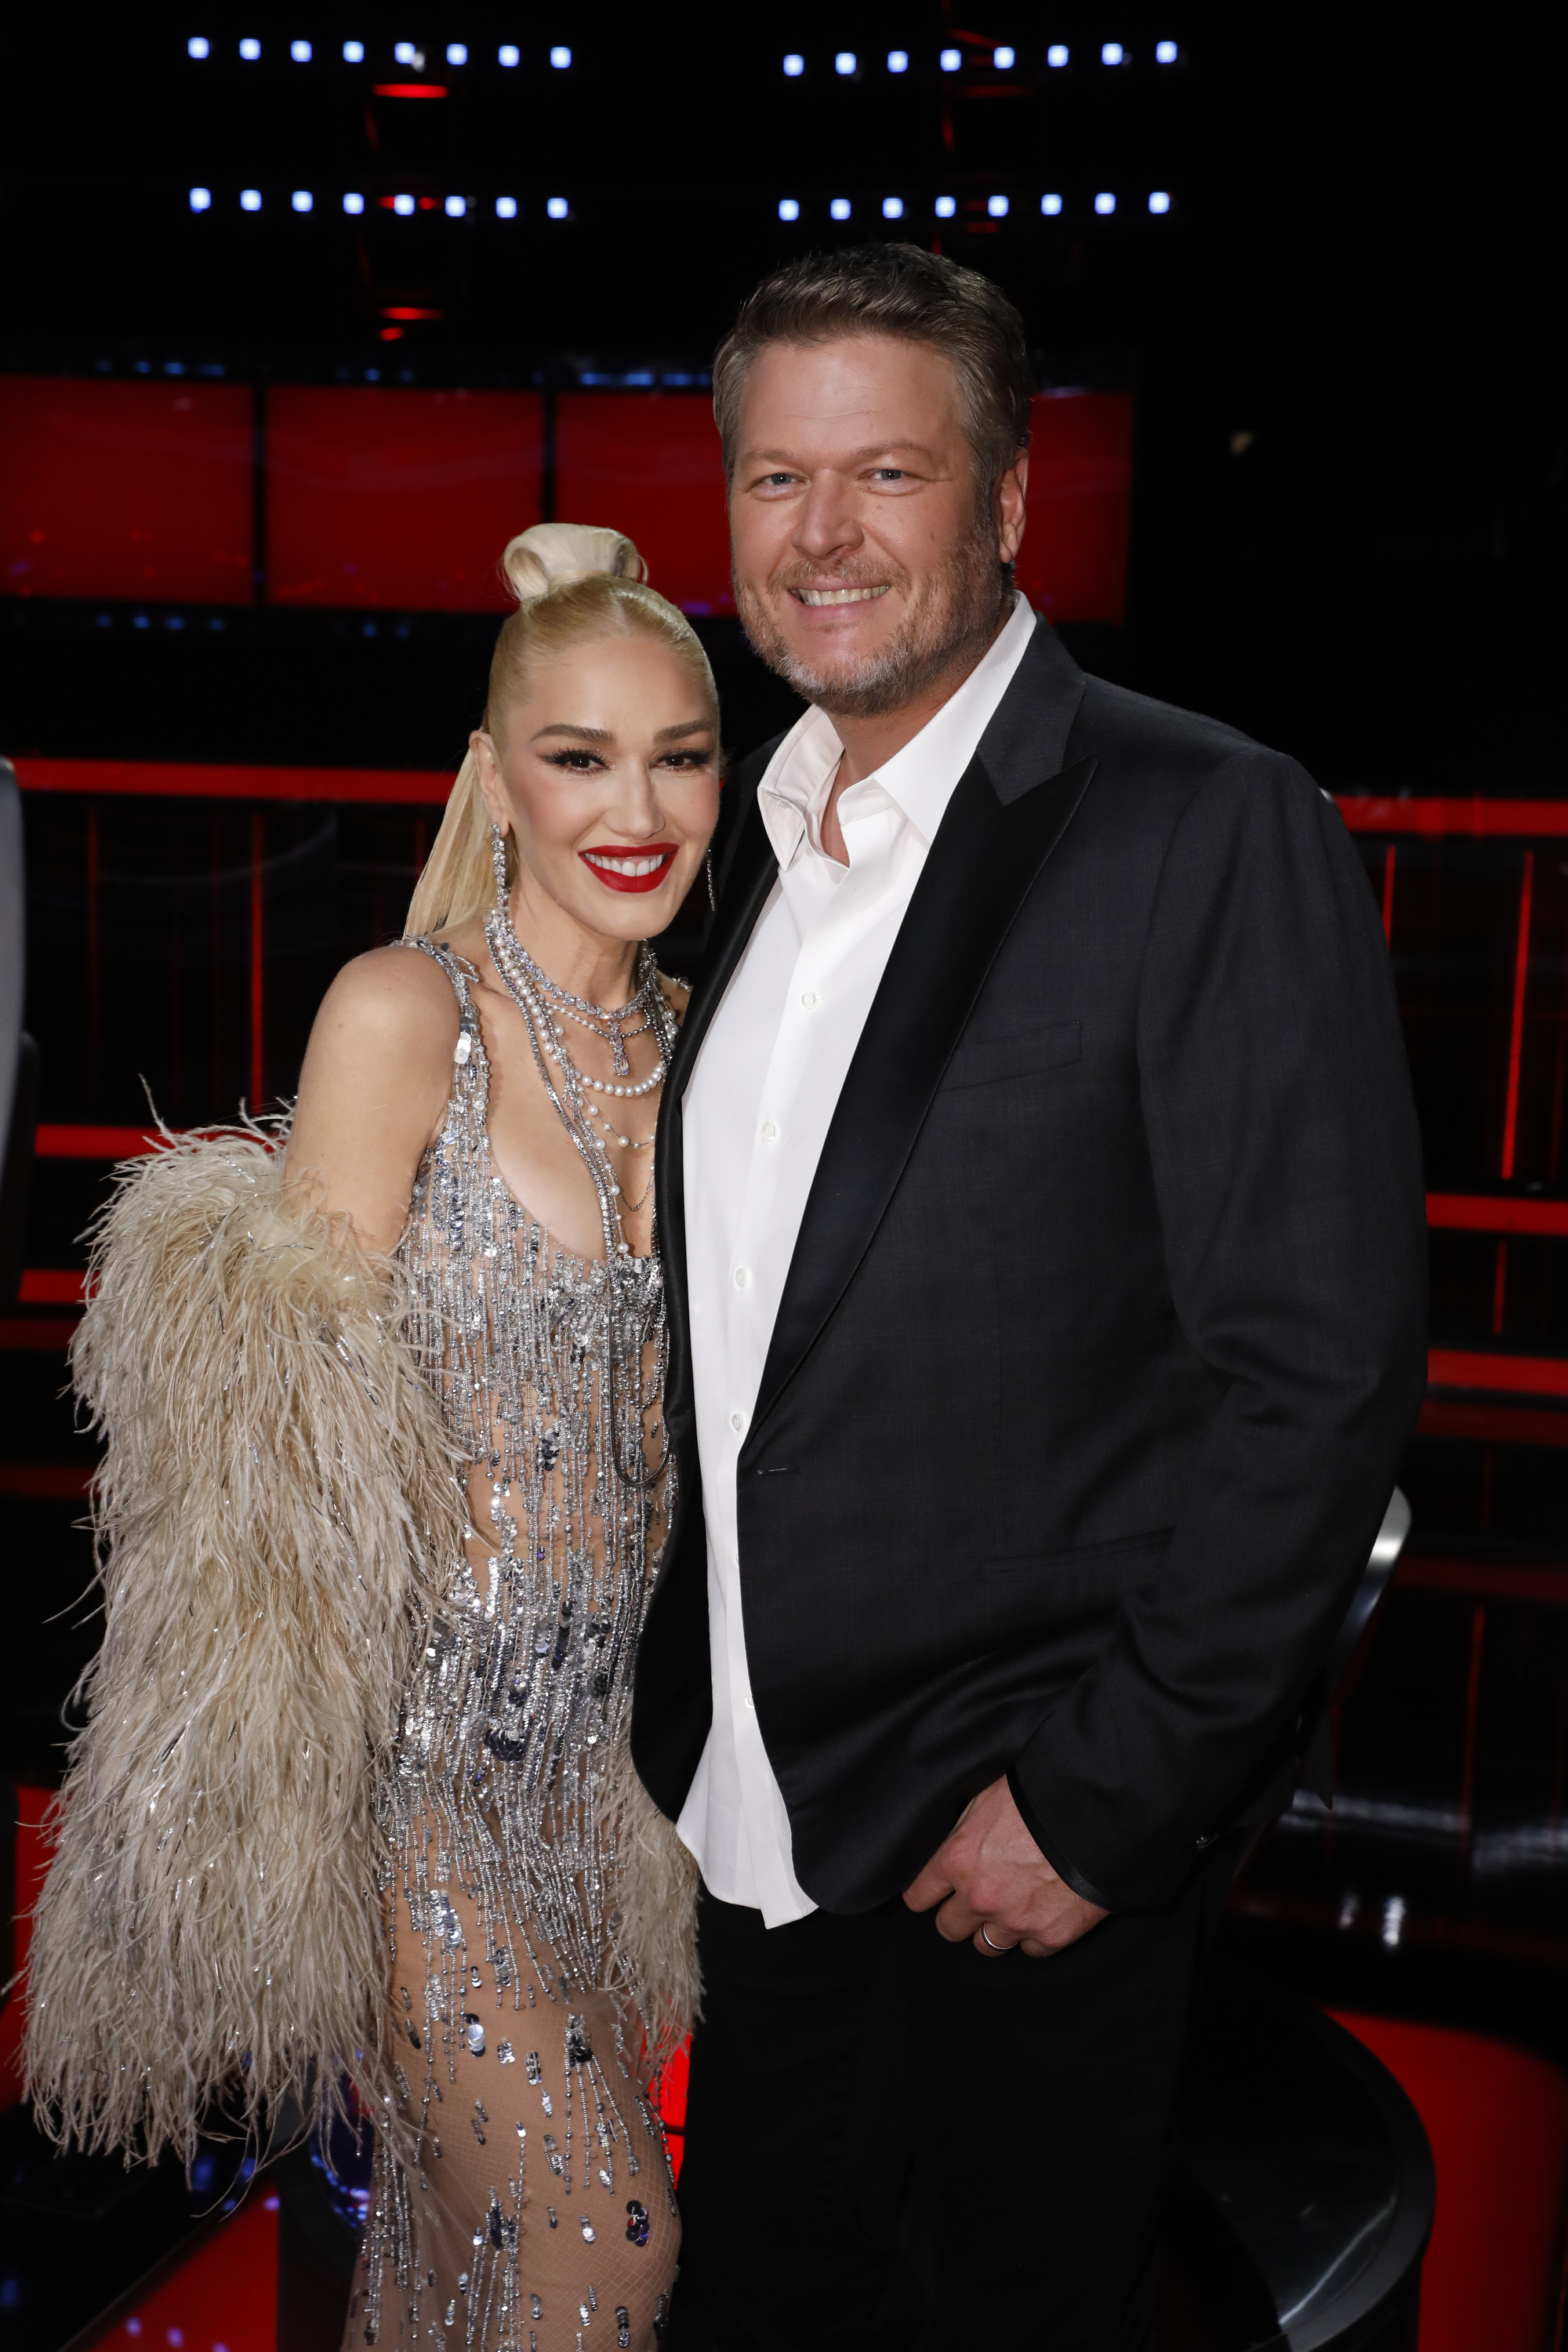 While Blake's business is flourishes, fans are concerned about him spending so much time apart from his wife Gwen Stefani